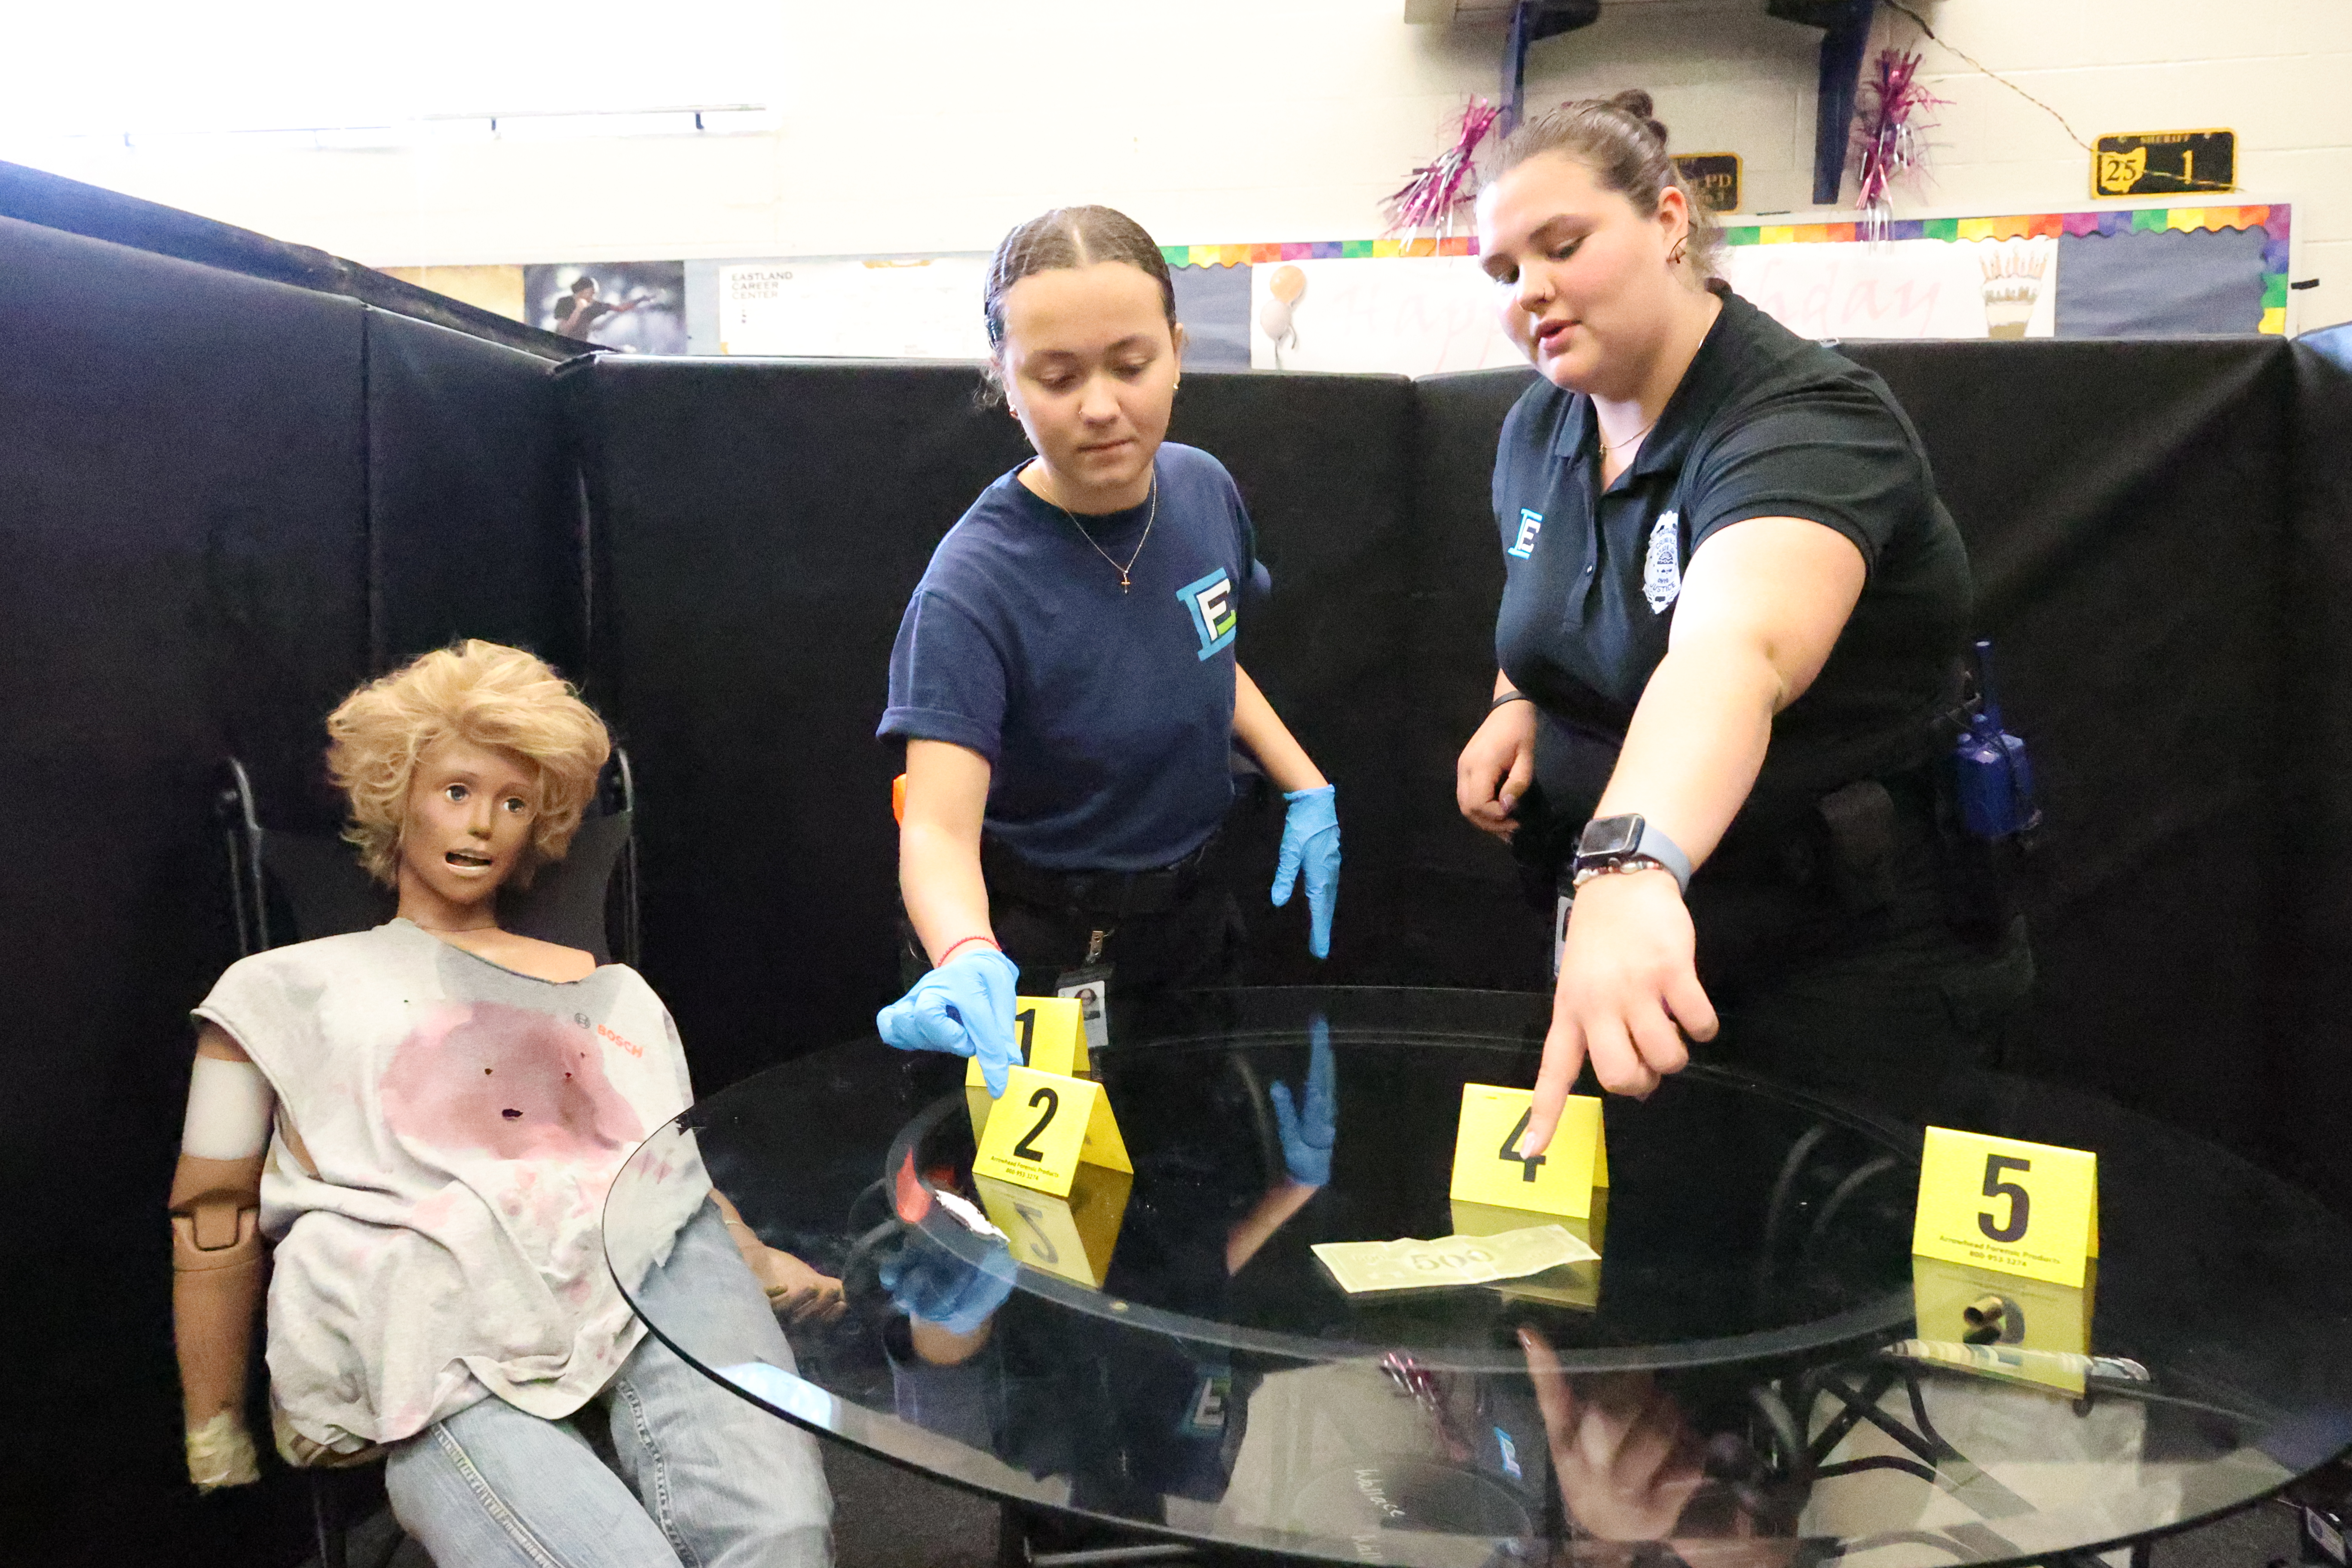 Two female students are examining a crime scene with a blood-soaked mannequin posed as a victim.